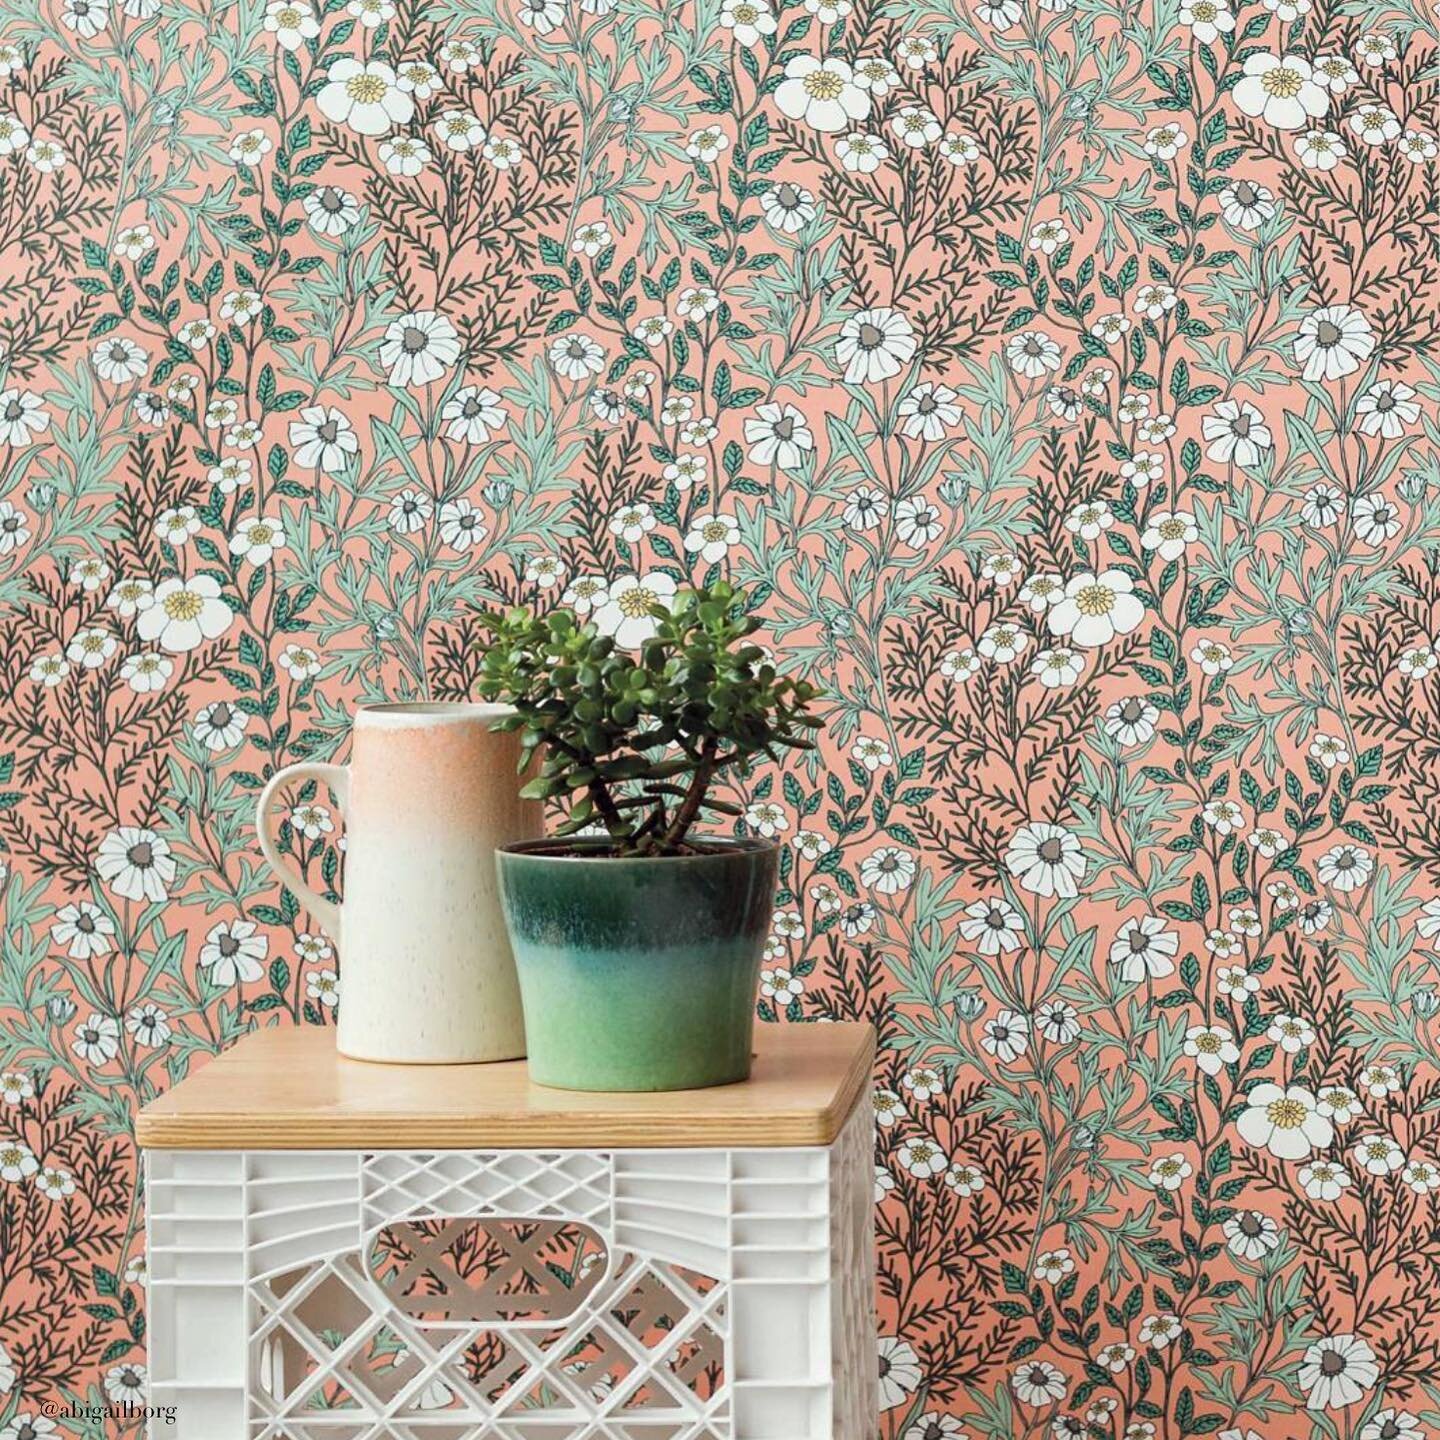 Wallpaper that blooms! (Wallpaper to bring the outside in)⁠⁠
.⁠⁠
A collection of some of my favorite floral wallpapers that remind me of spring blooms. I'll do a post soon on some of the things I consider when choosing a wallpaper for a space, but he